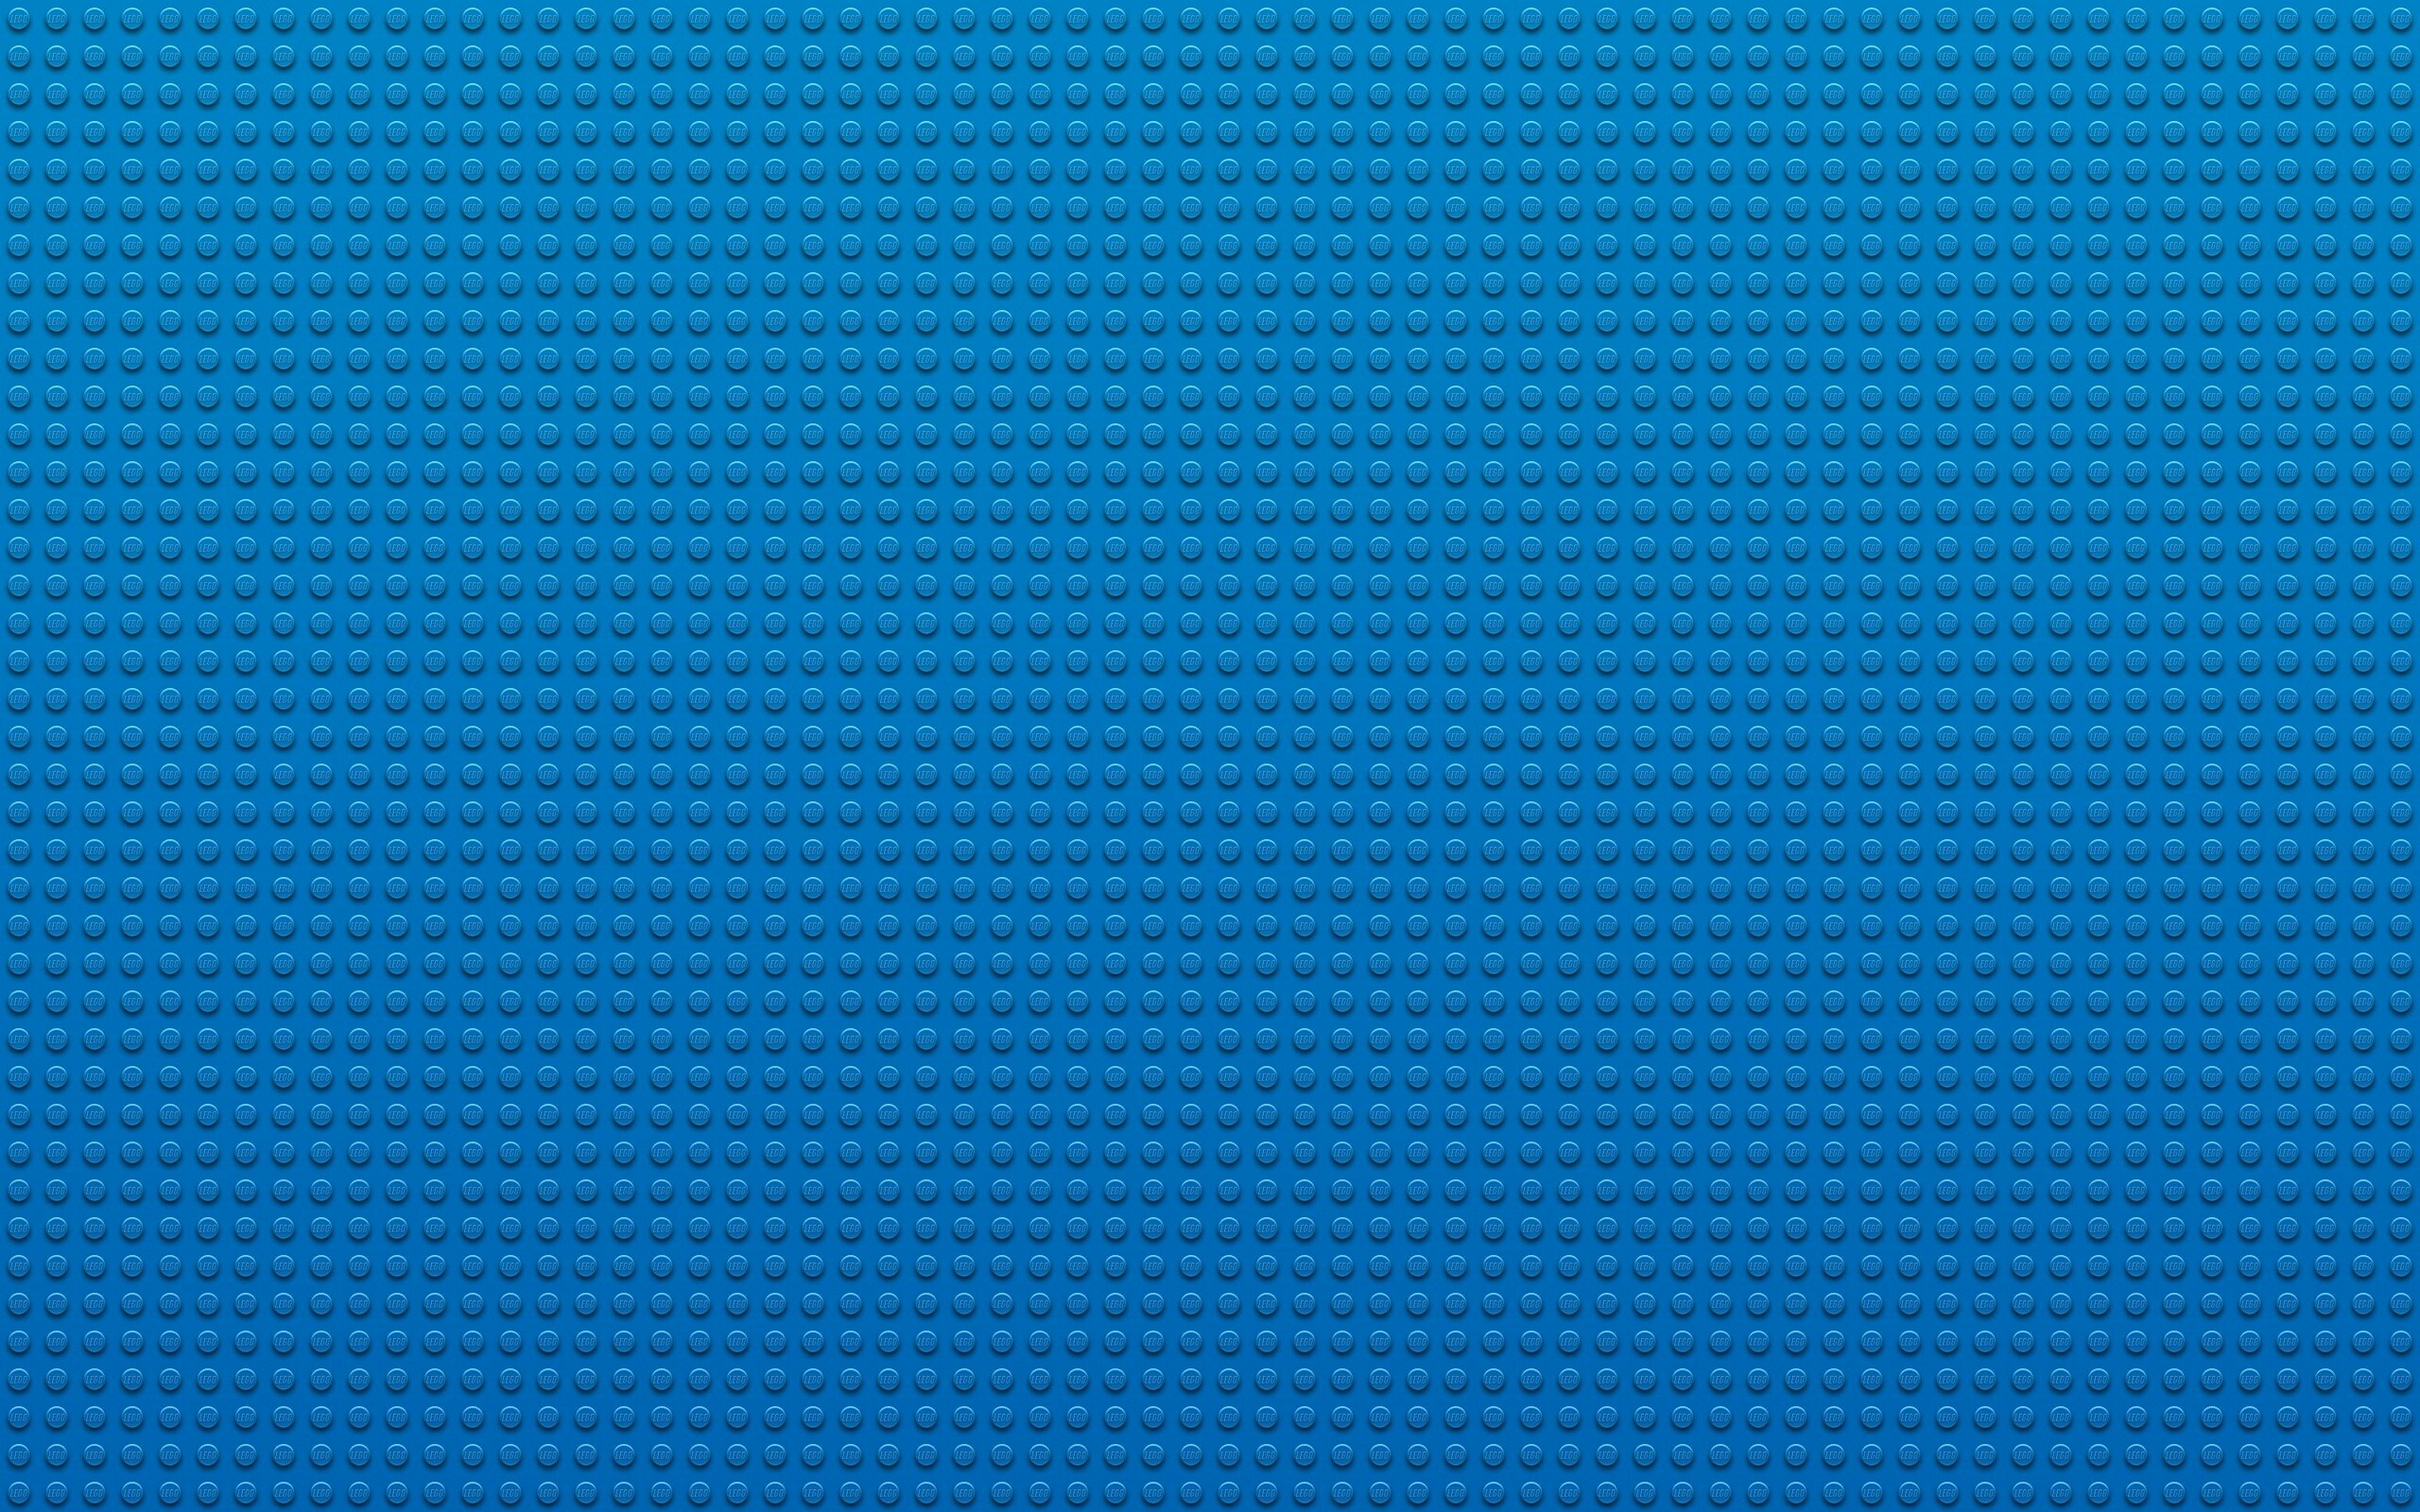 Lego: Used in classrooms, as it encourages creative and critical thinking. 2560x1600 HD Background.